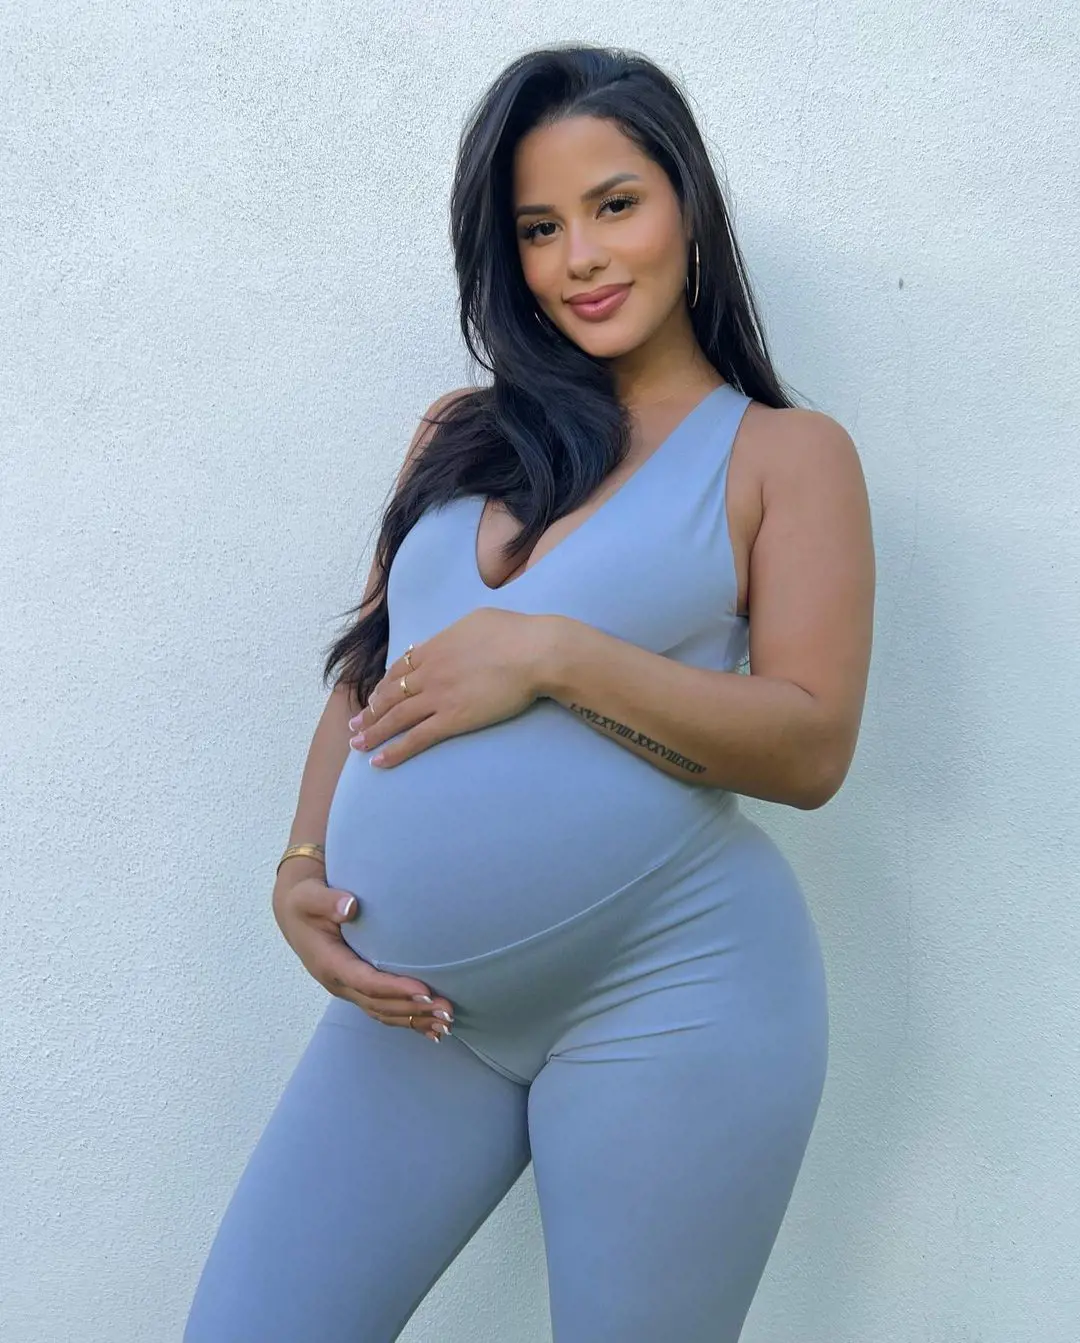 Katya Elise Henry snapping a pregnancy photoshoot in November 2022. She gave birth to a son Harlem on January 12, 2023